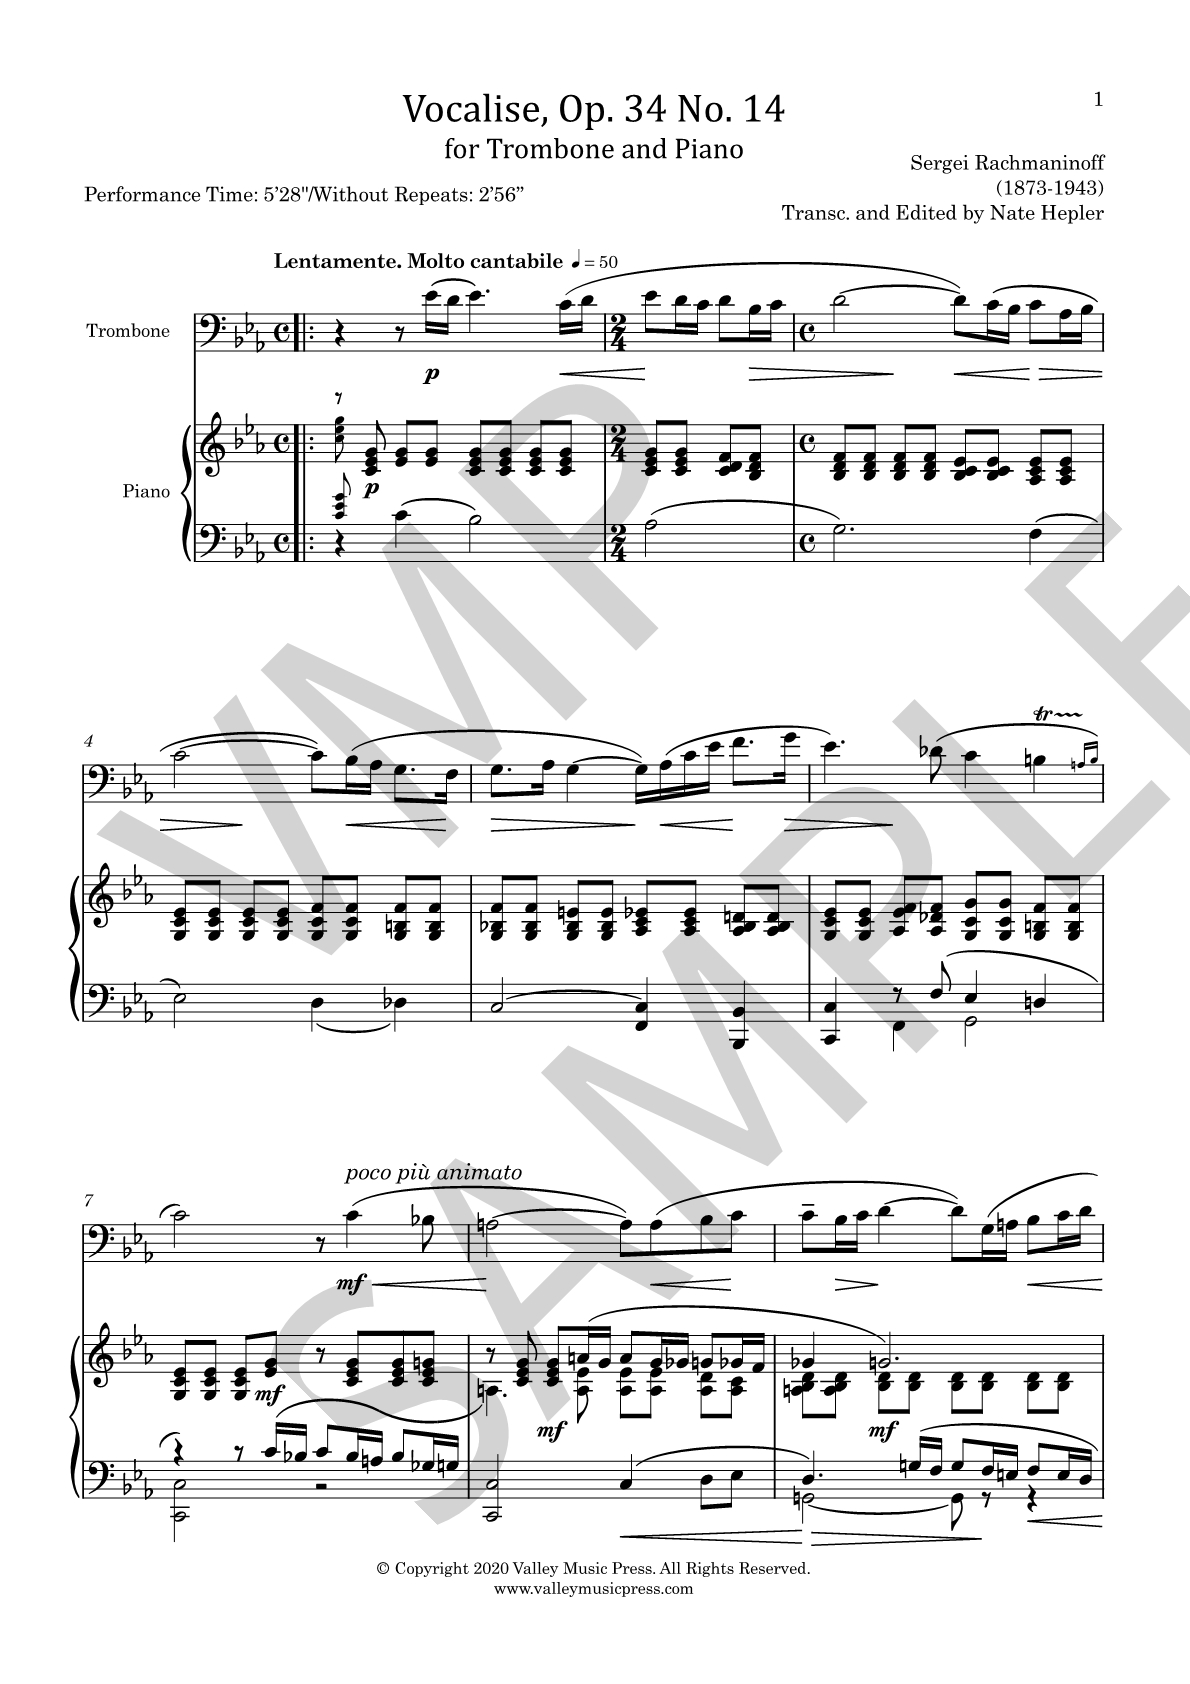 Rachmaninoff - Vocalise Op. 34 No. 14 (Trb & Piano) - Click Image to Close